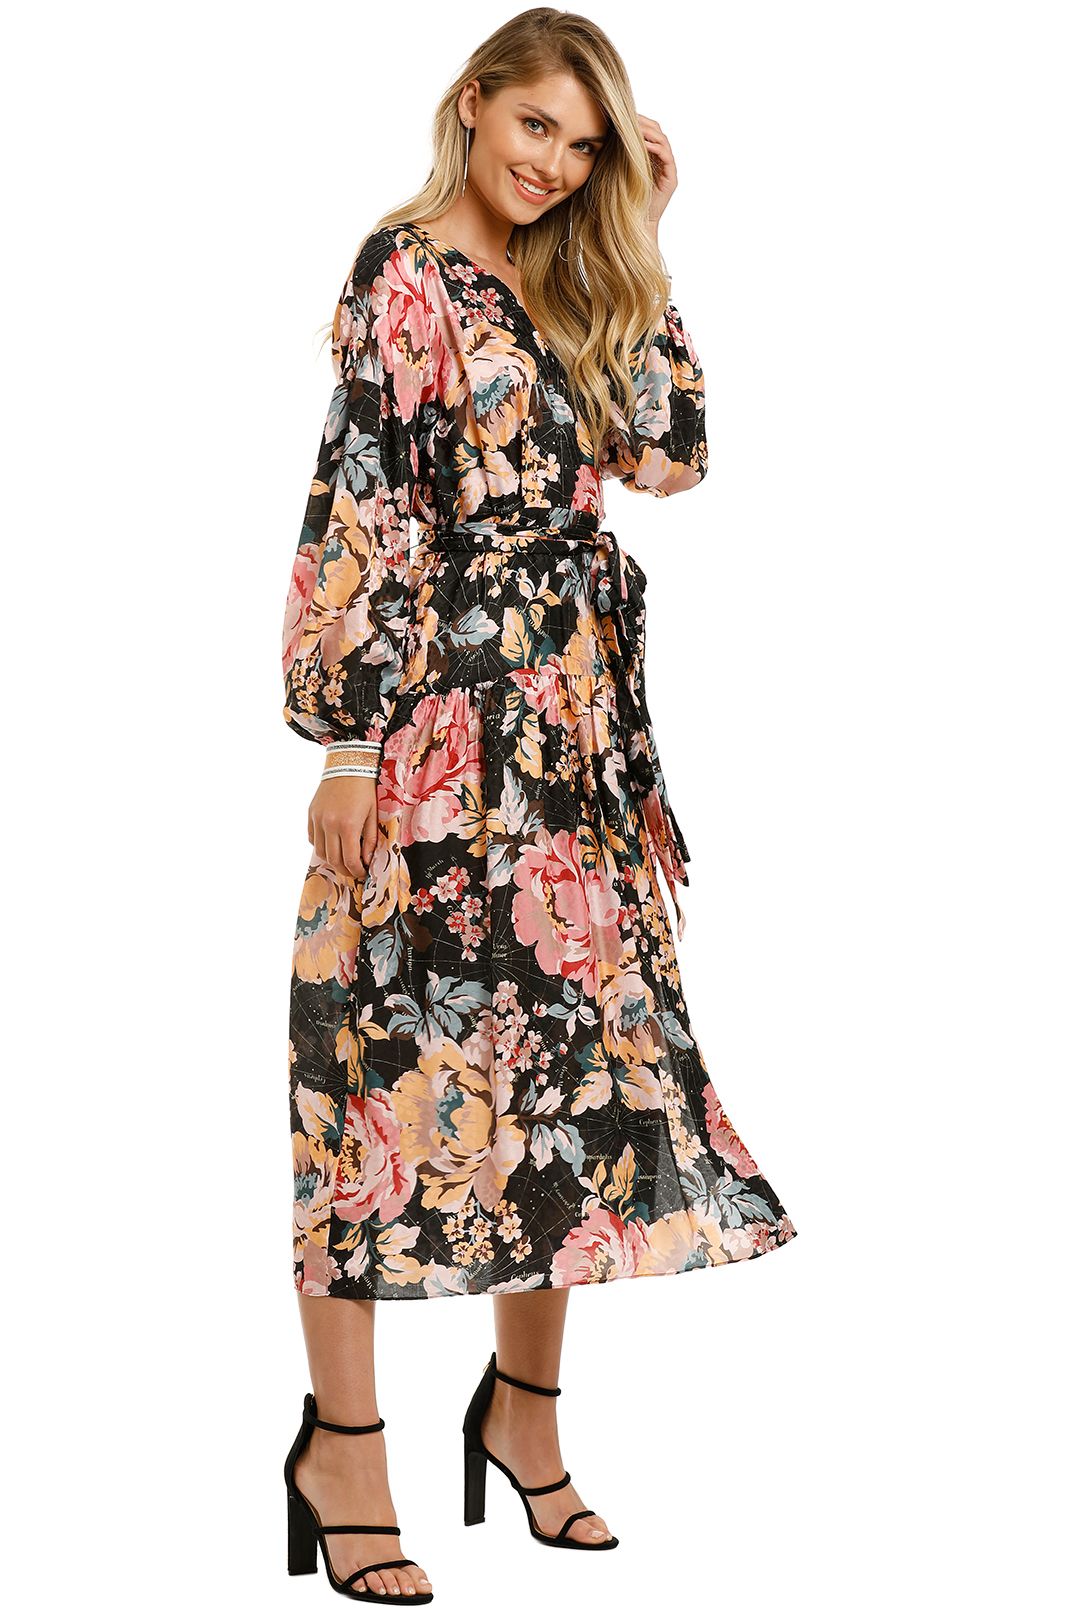 Ginger-And-Smart-The-Floral-Charts-Wrap-Dress-Side